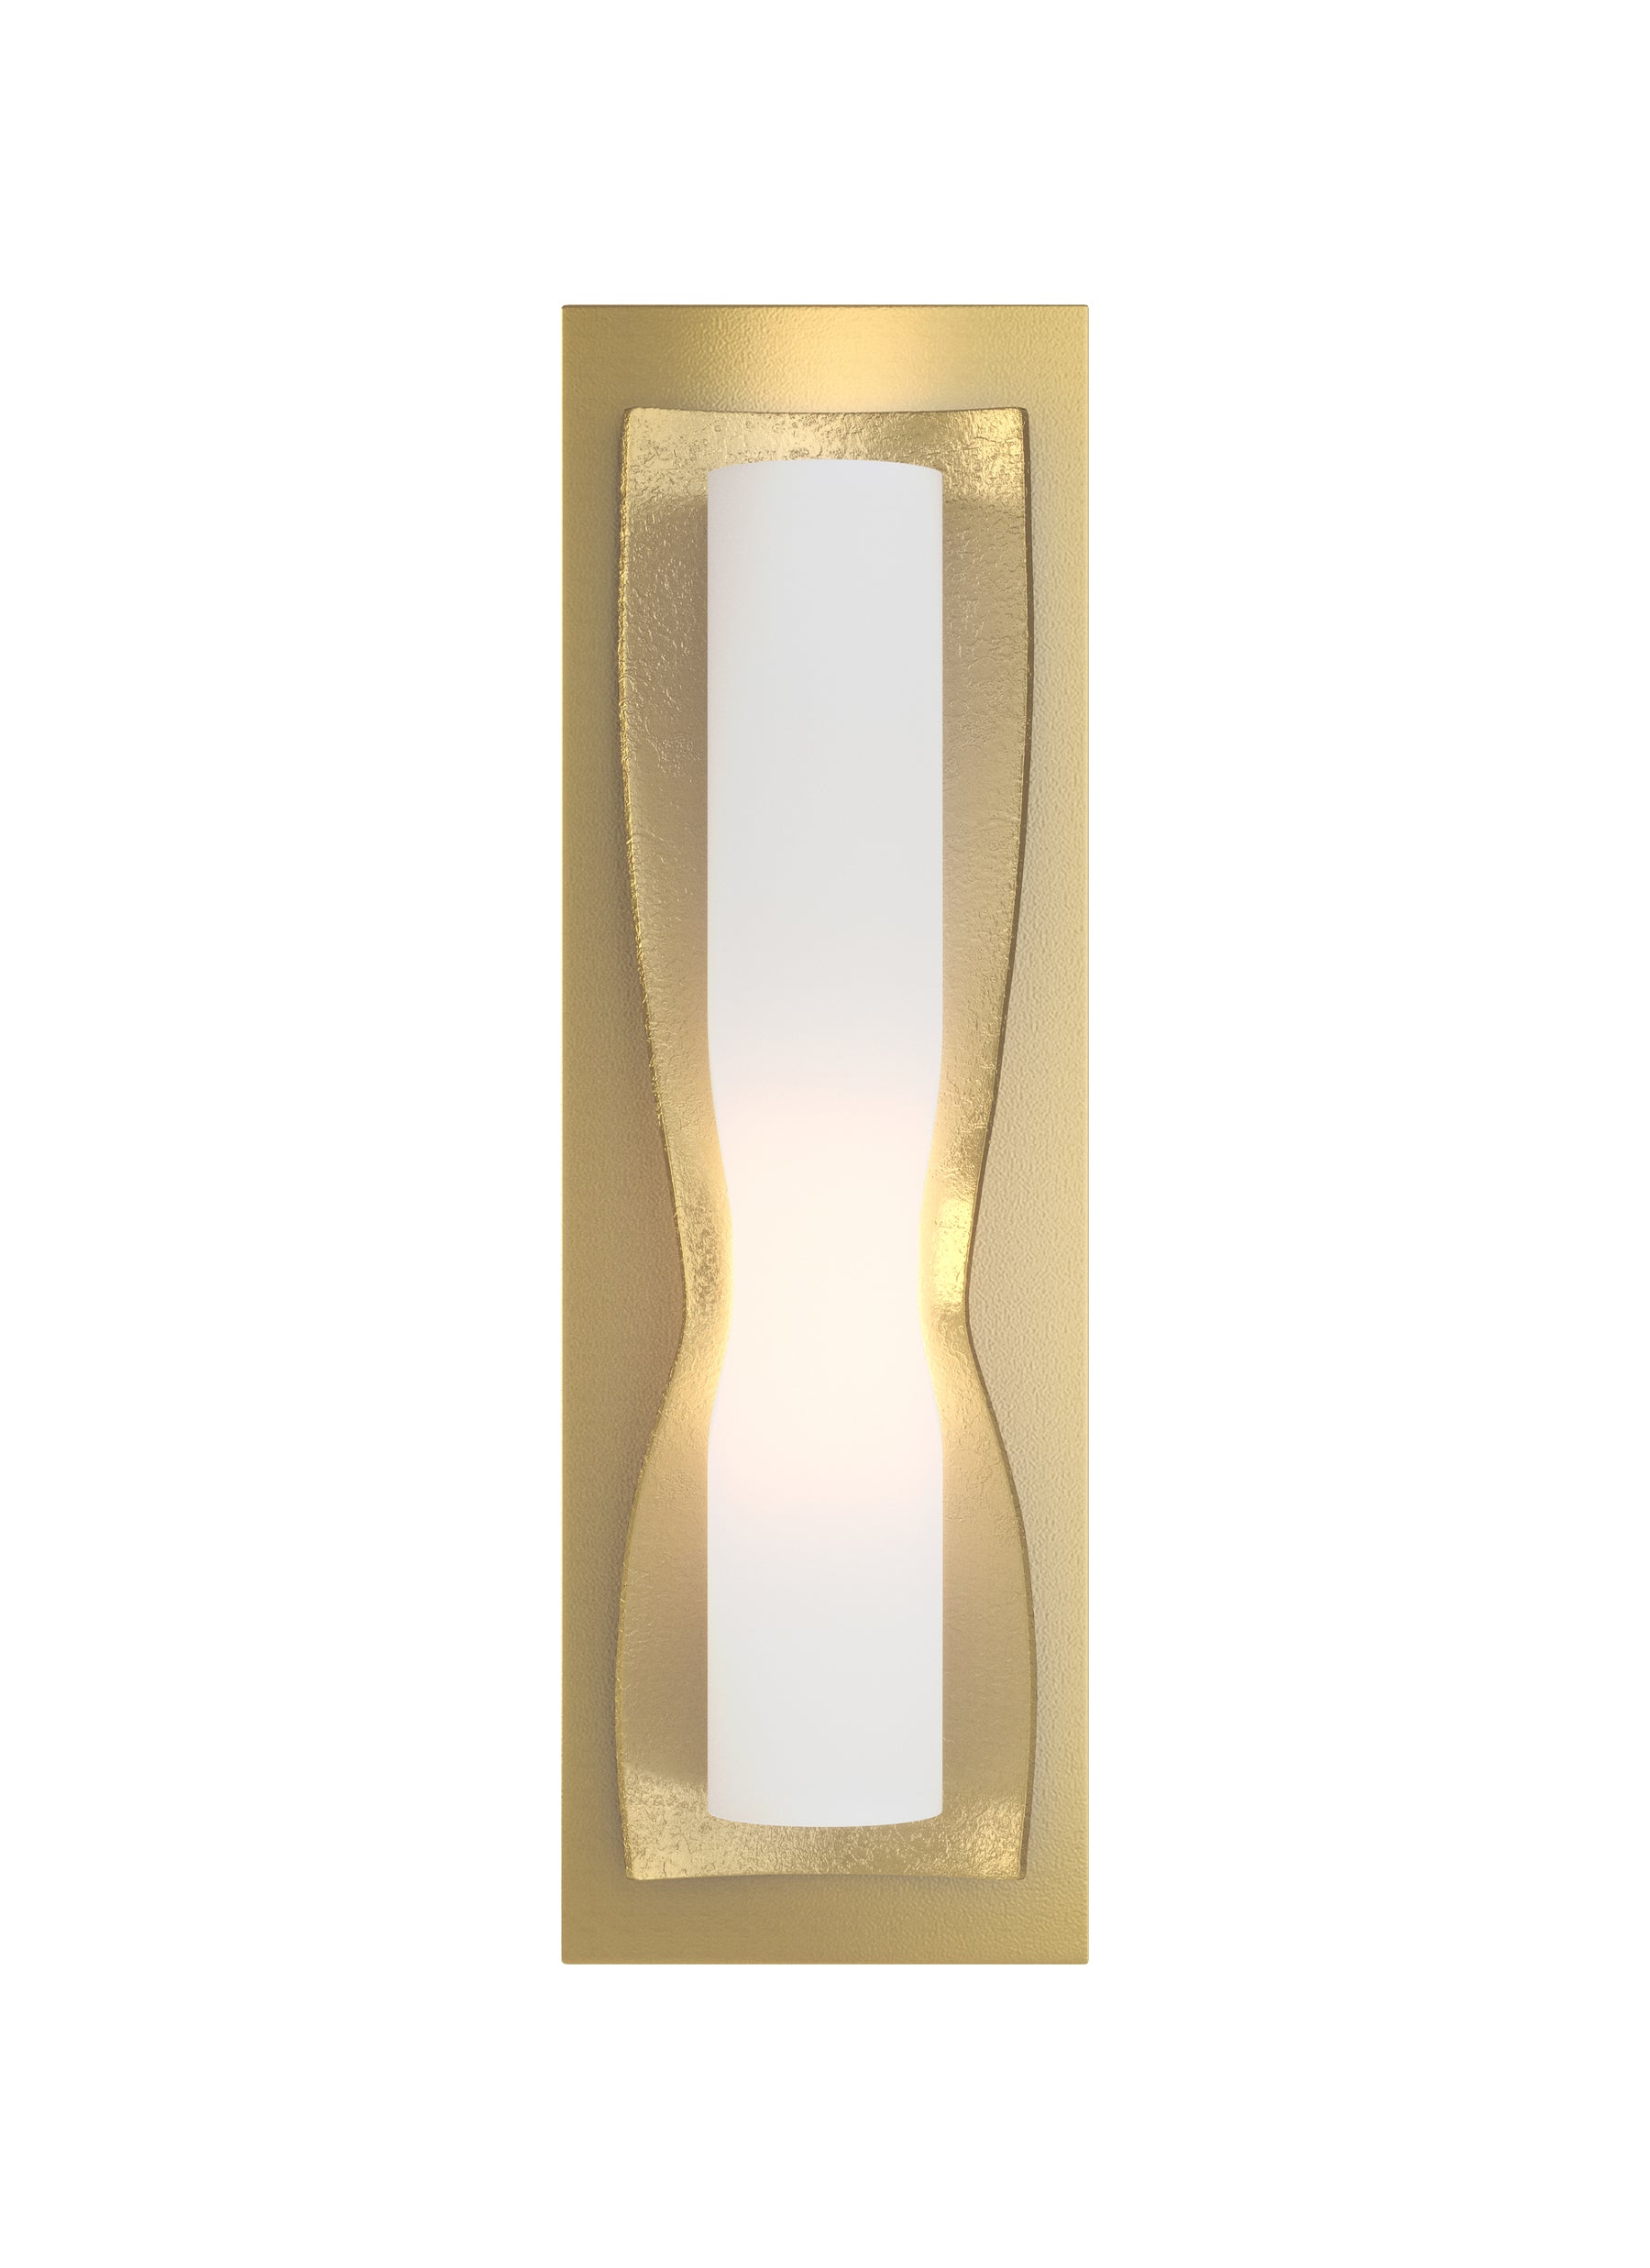 Dune 1L wall sconce - 204790